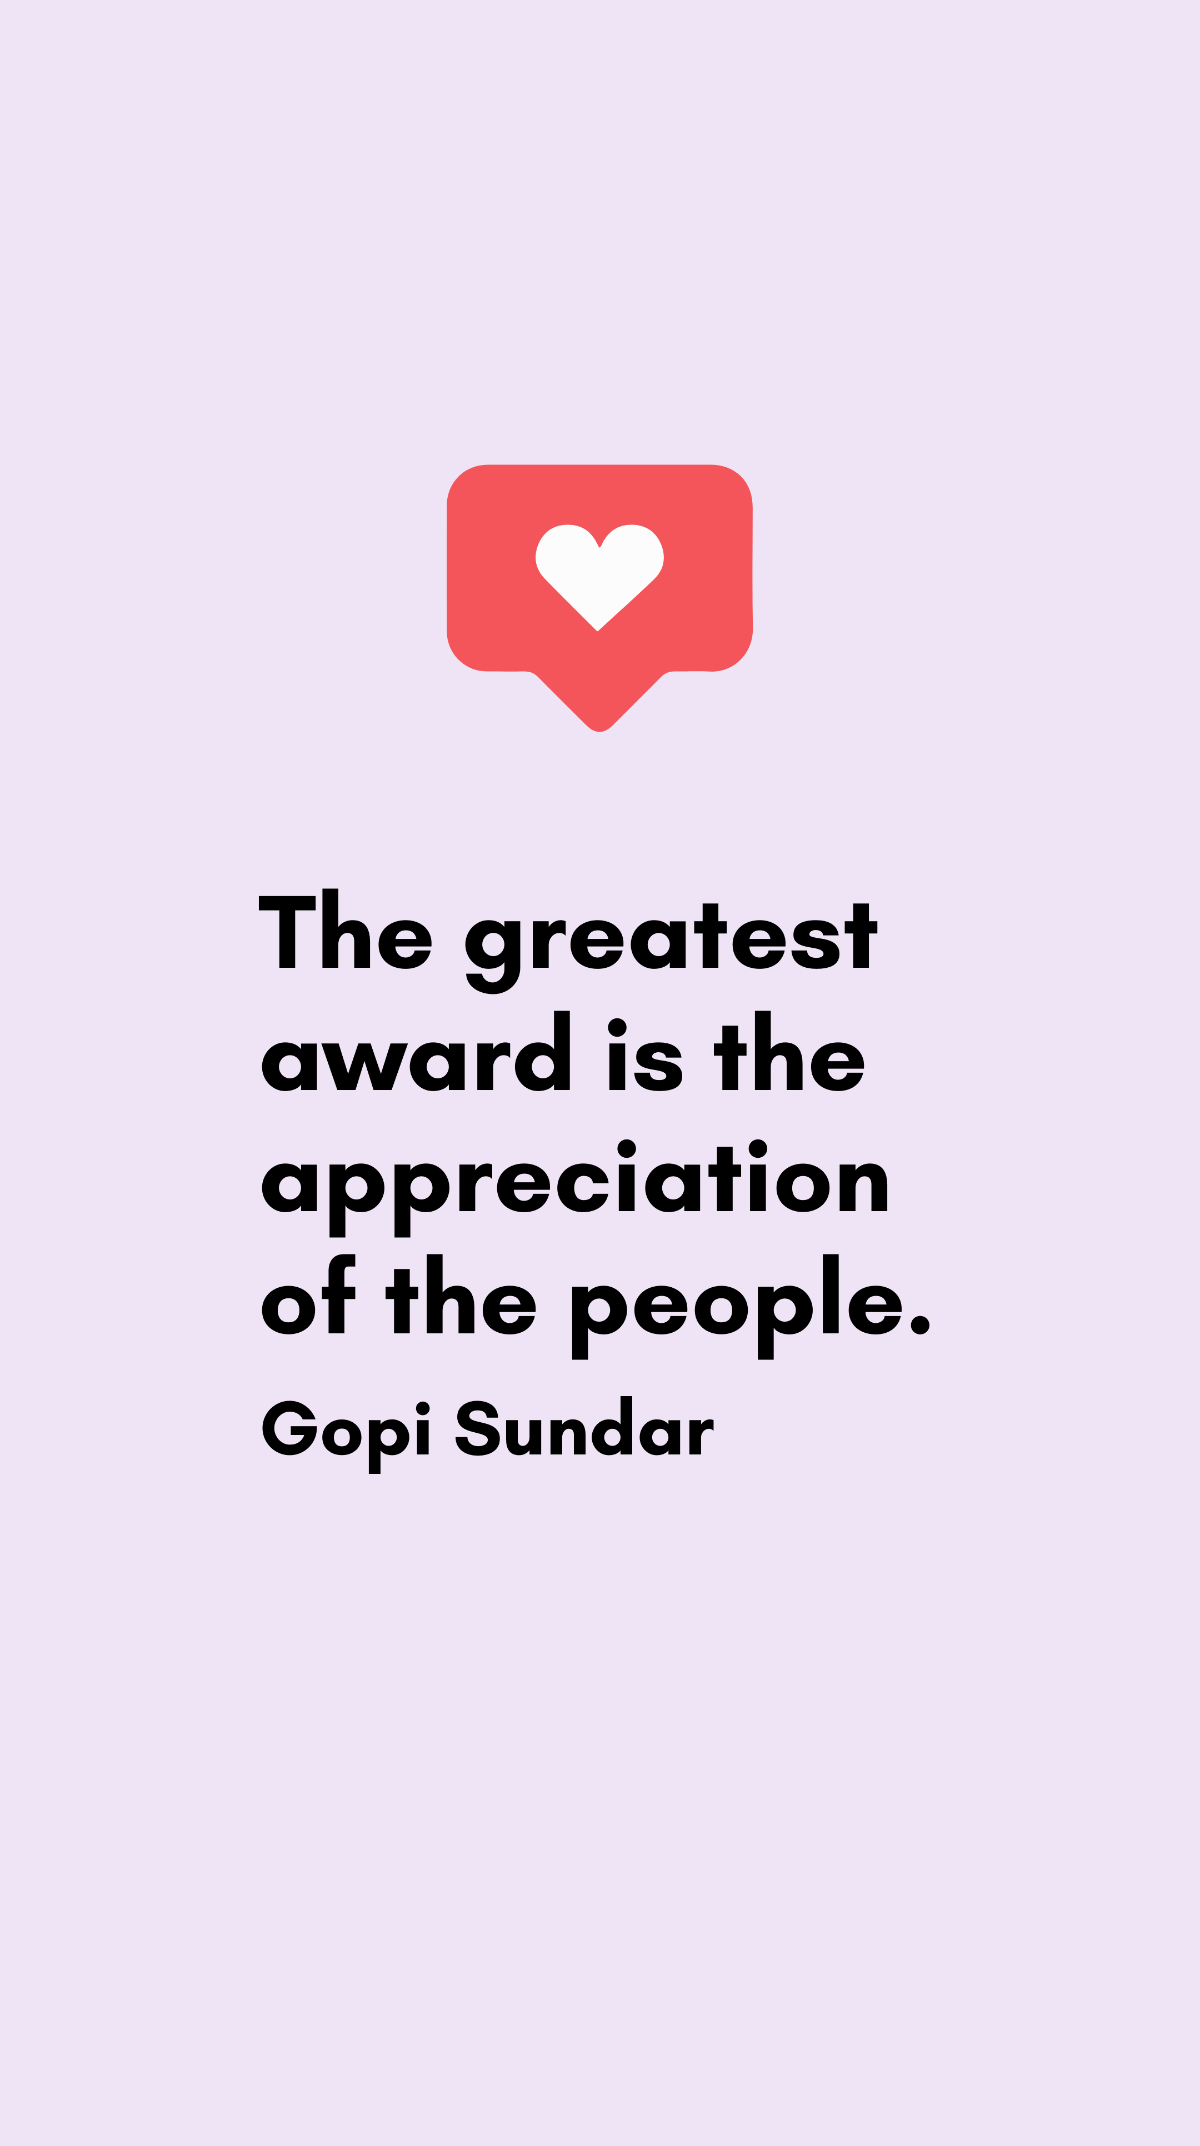 Free Gopi Sundar - The greatest award is the appreciation of the people. Template